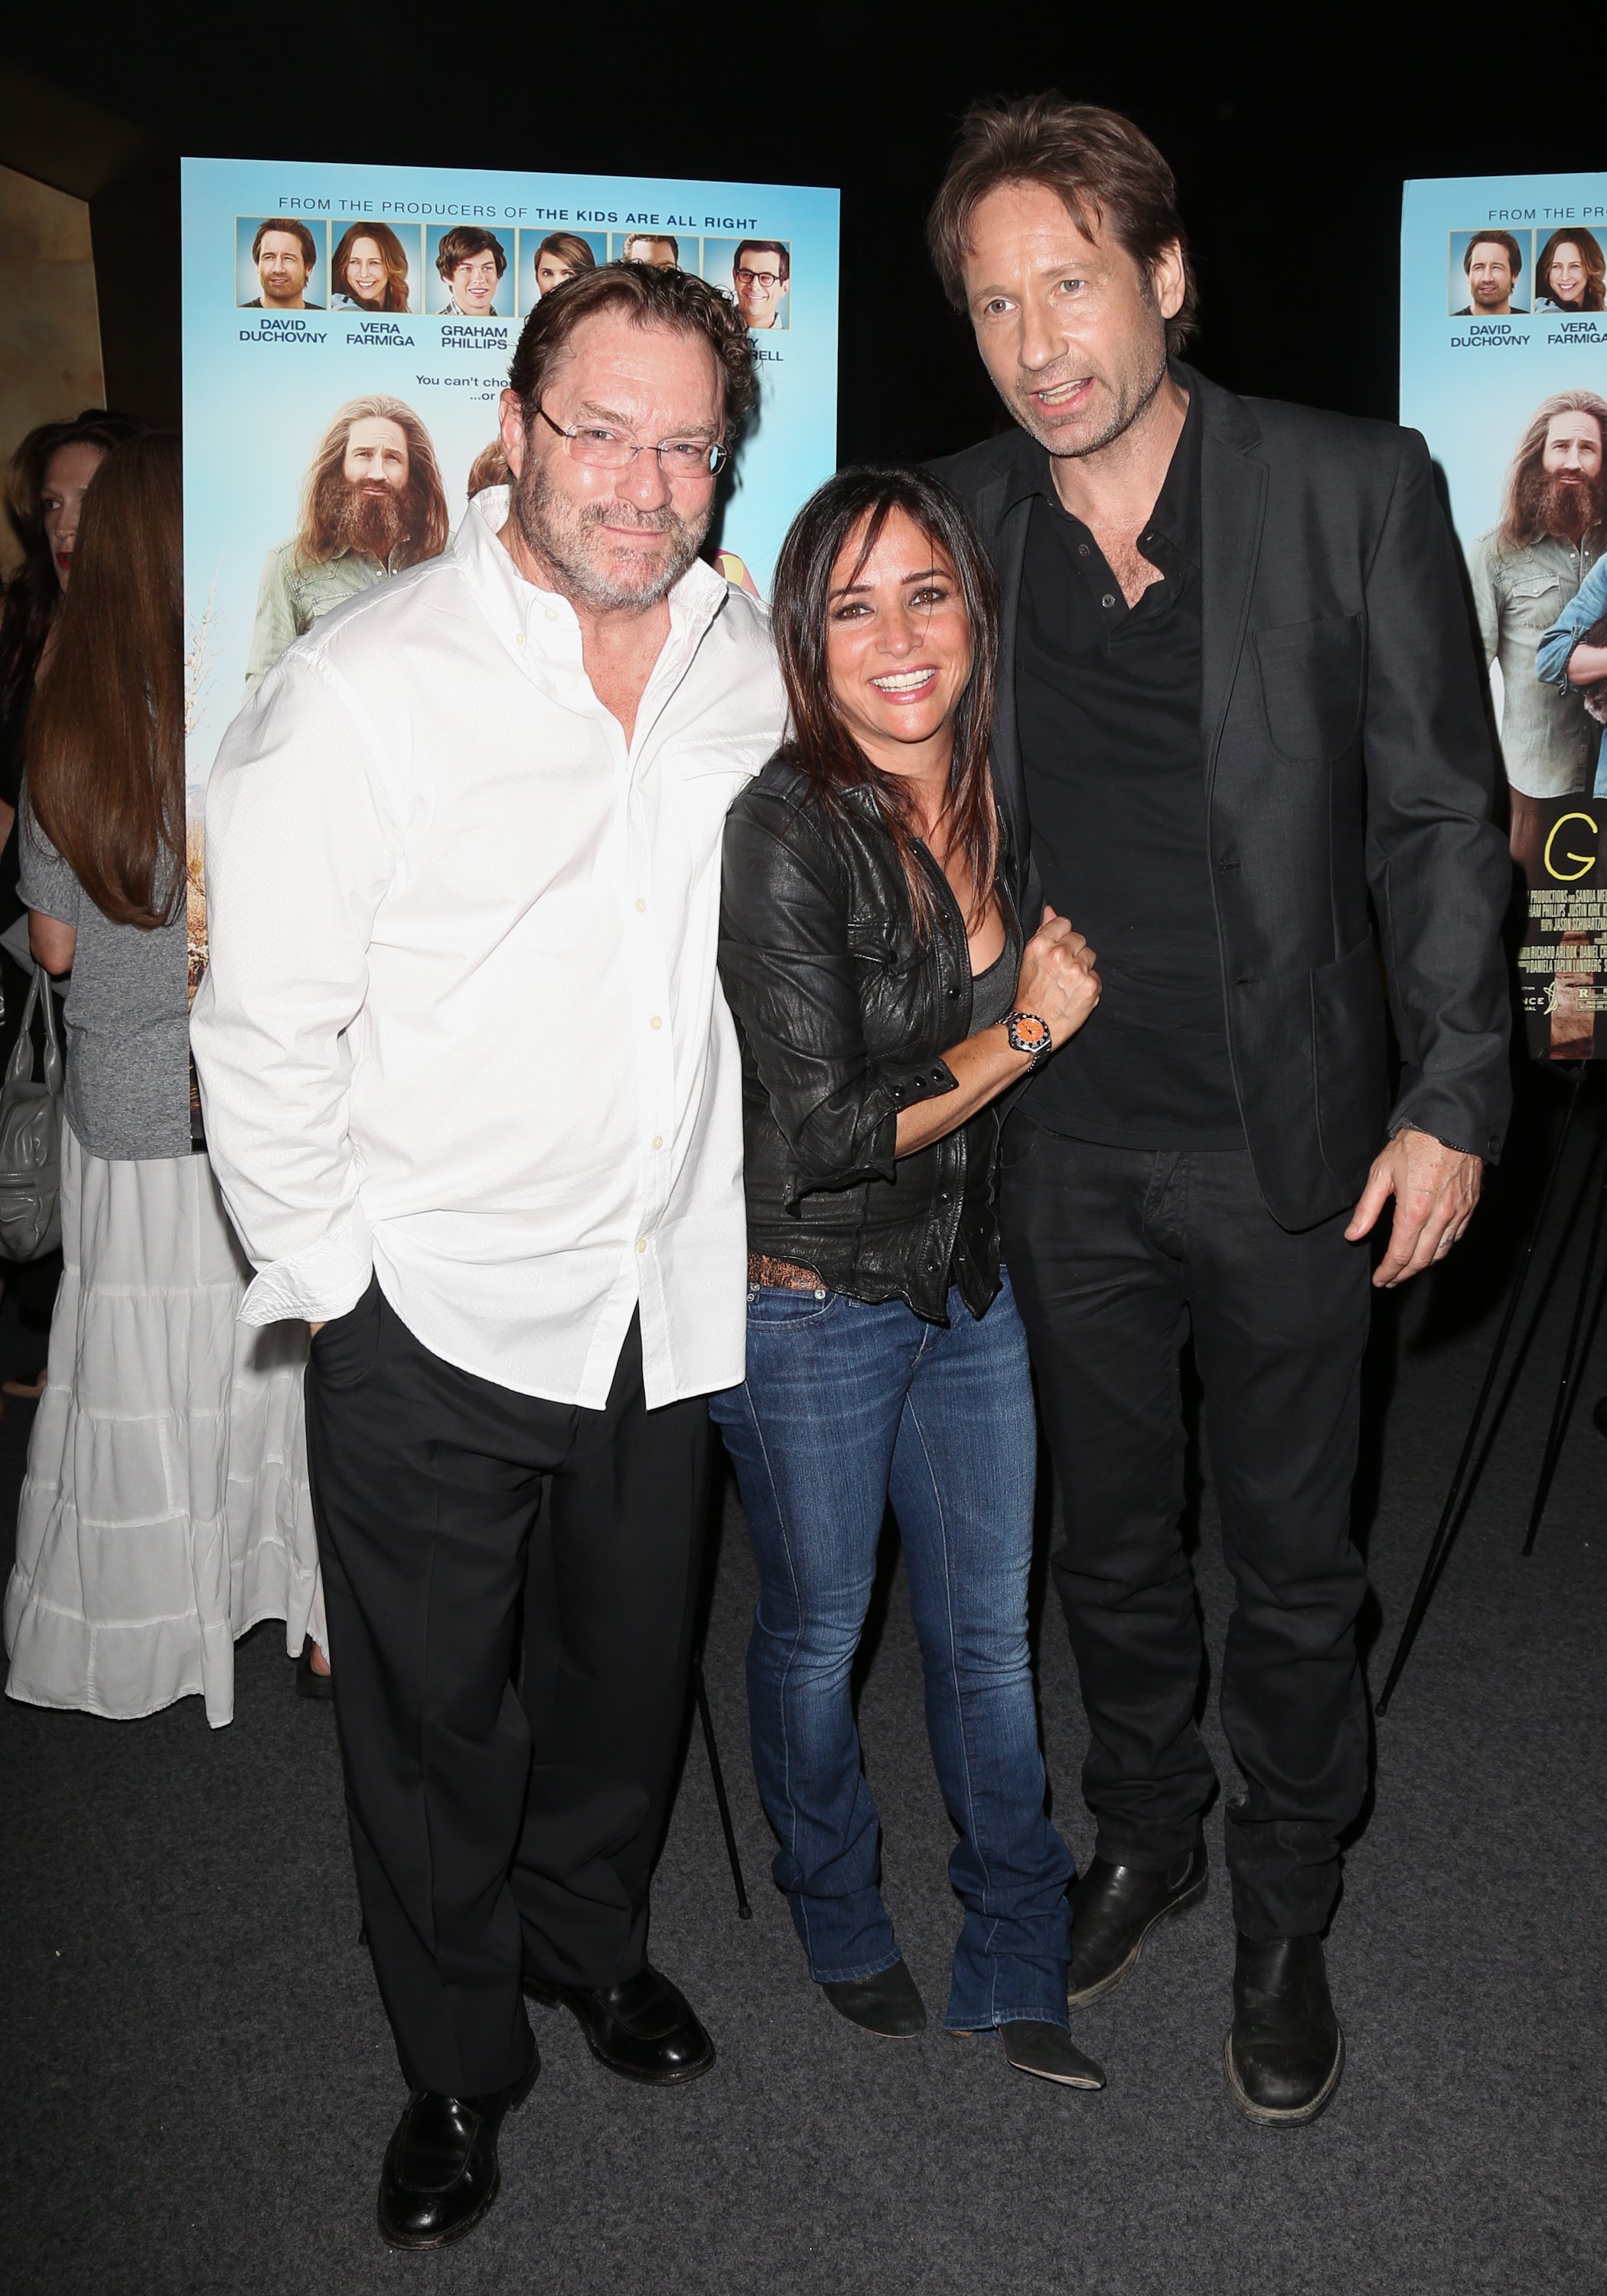 Writer Felix O. Adlon, Actress Pamela Adlon & Actor David Duchovny attend the "Goats" premiere at Landmark Nuart Theatre on August 8, 2012, in Los Angeles, California. | Source: Getty Images